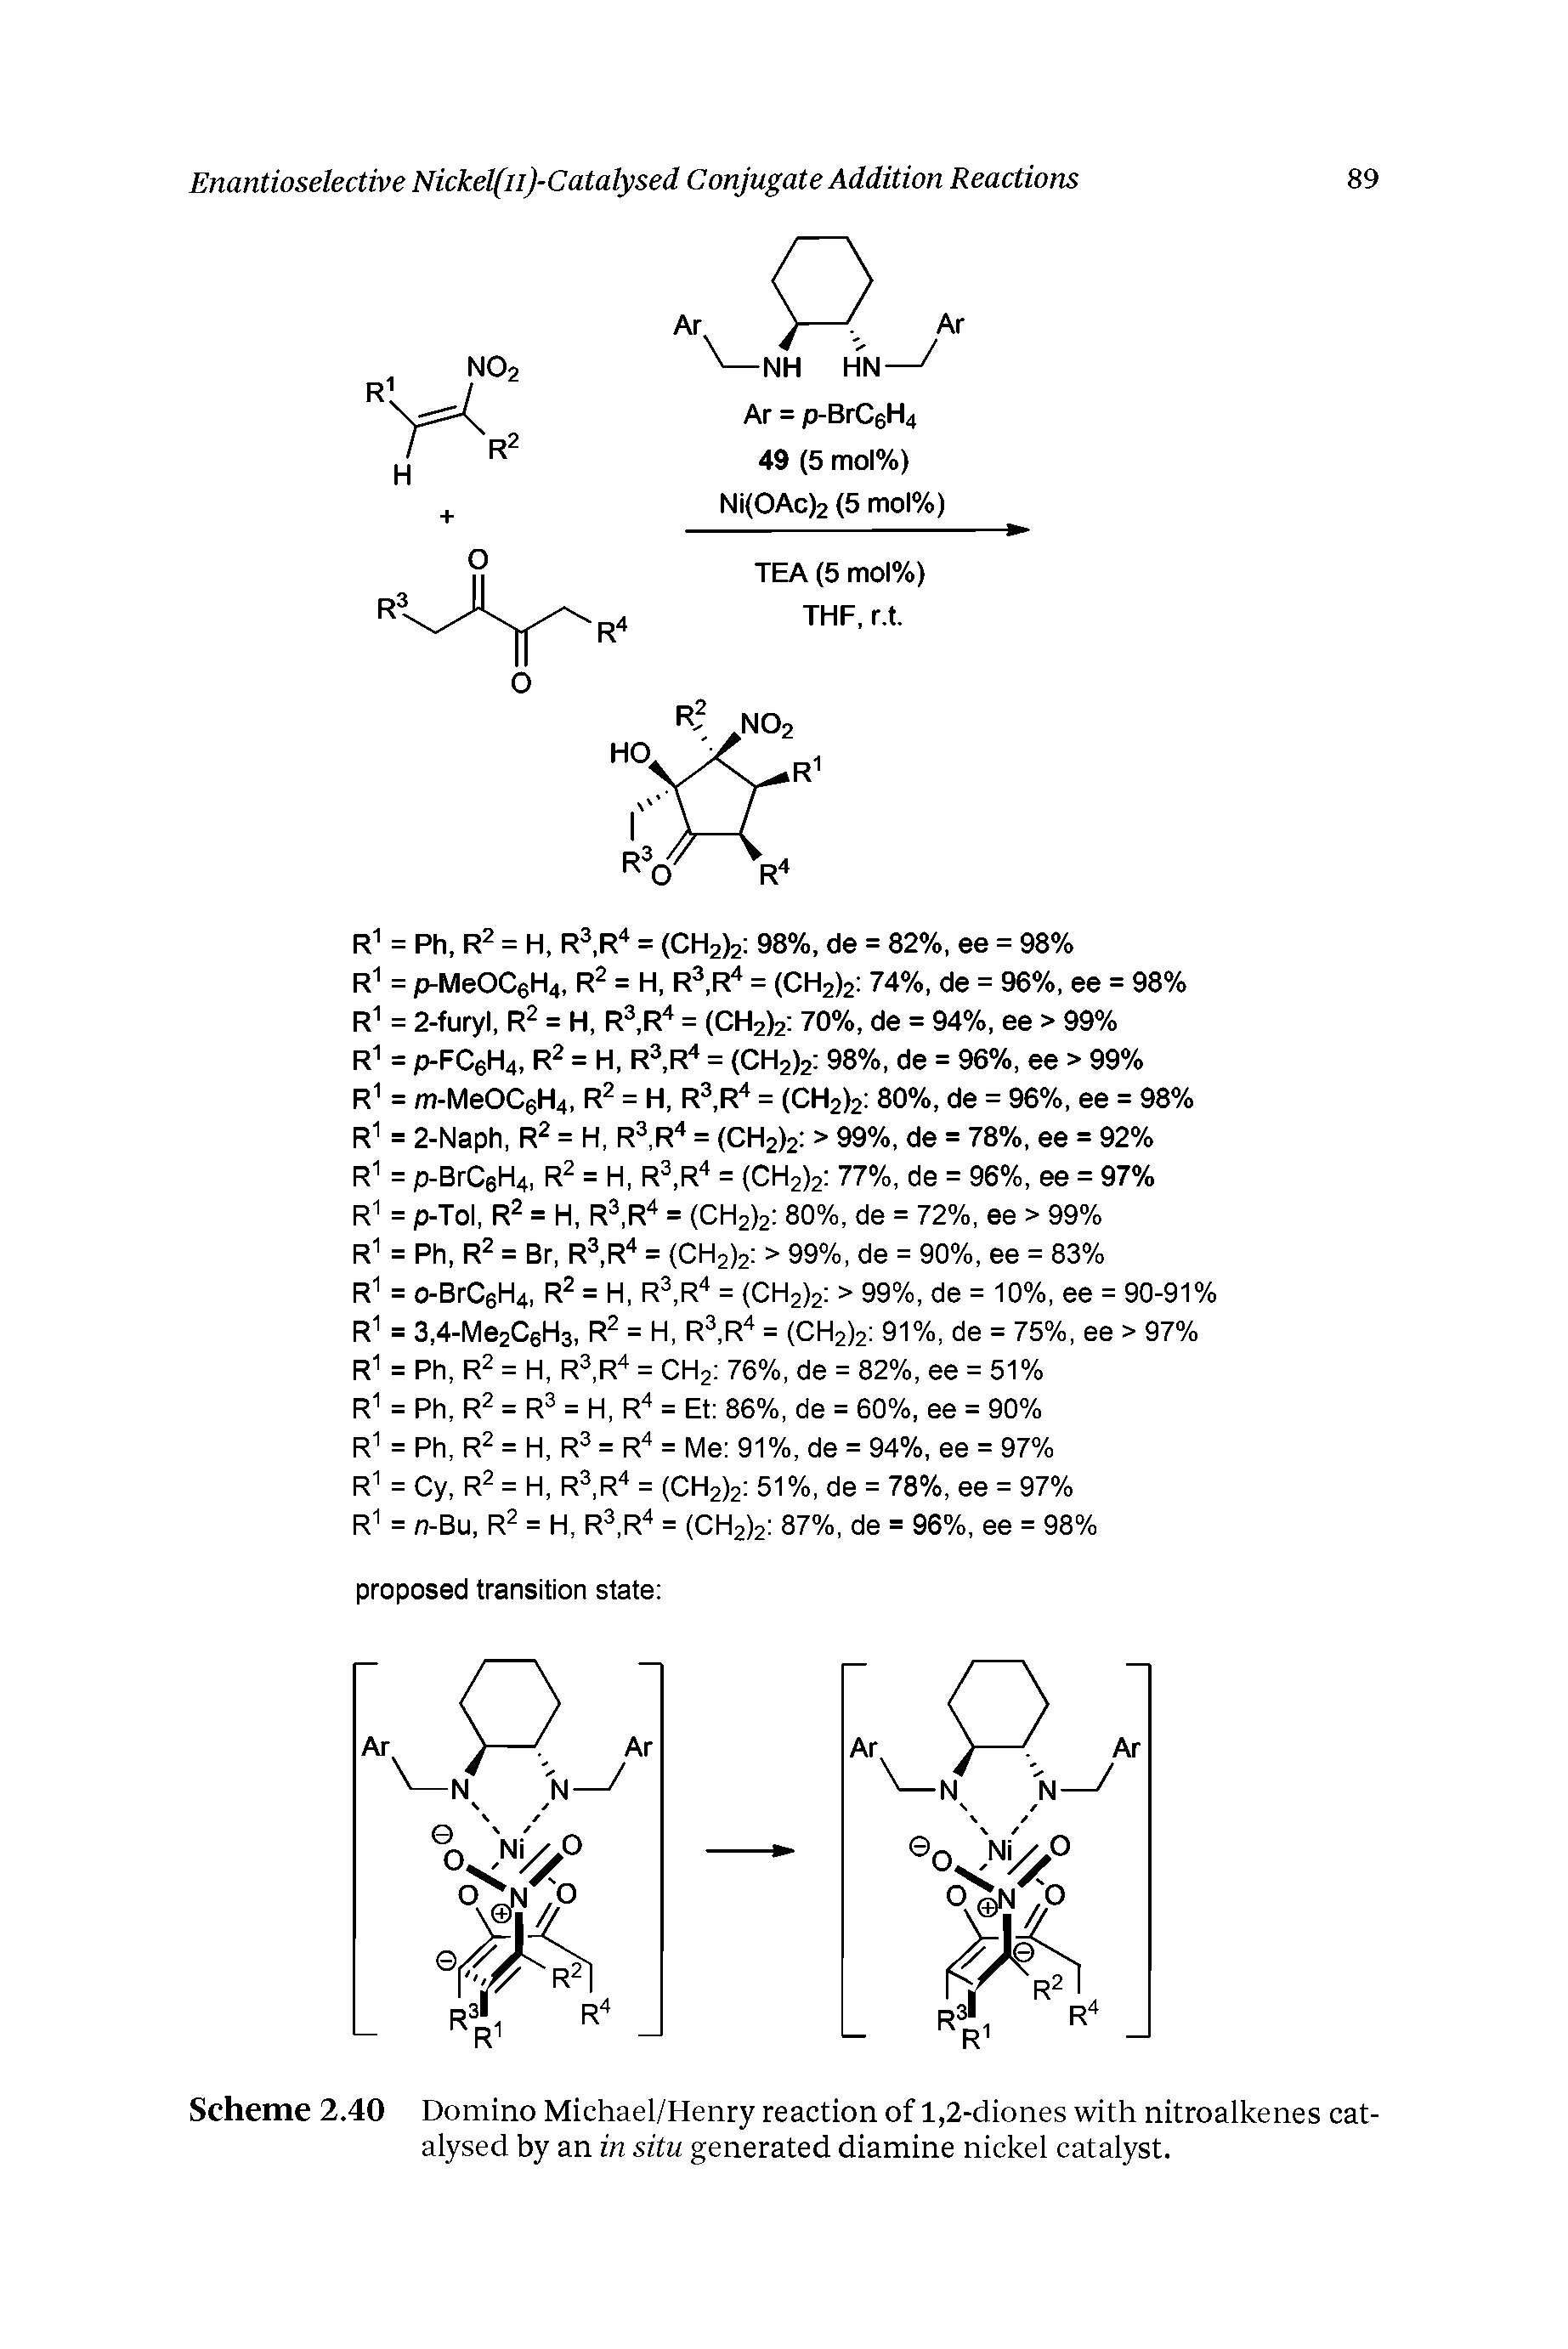 Scheme 2.40 Domino Michael/Henry reaction of 1,2-diones with nitroalkenes catalysed by an in situ generated diamine nickel catalyst.